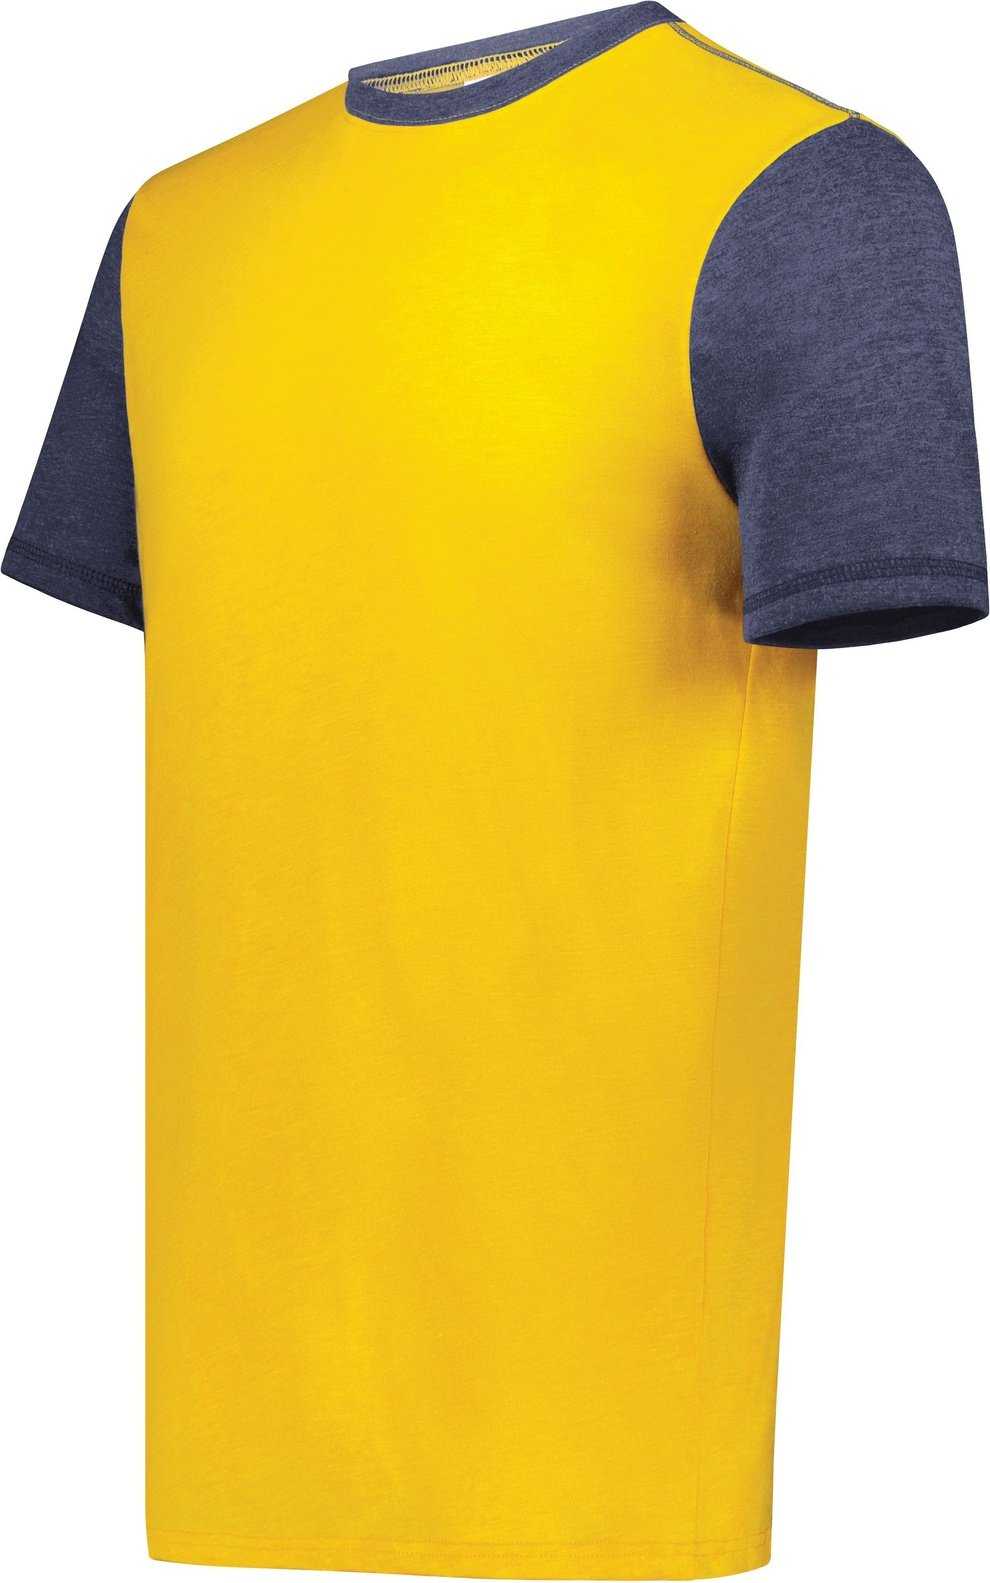 Augusta 6876 Gameday Vintage Ringer Tee - Gold Heather Navy Heather - HIT a Double